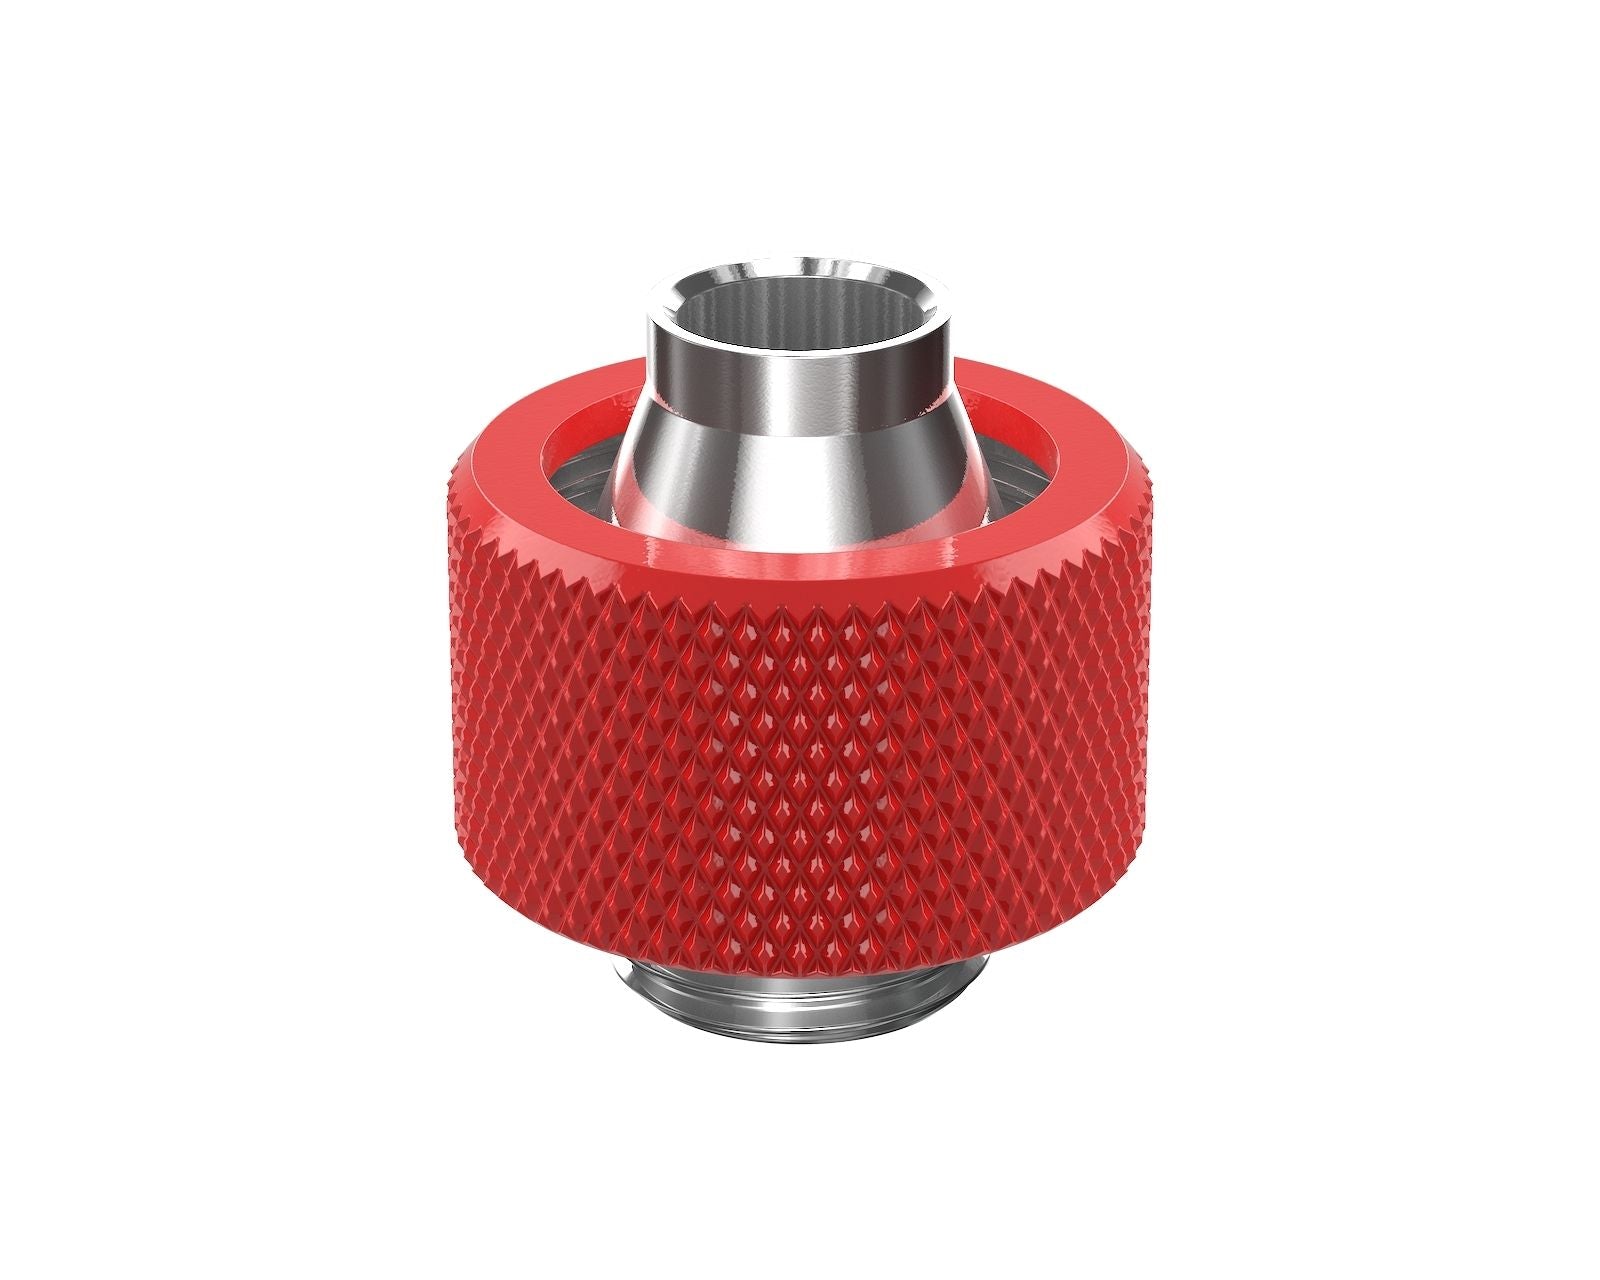 PrimoChill SecureFit SX - Premium Compression Fitting For 3/8in ID x 5/8in OD Flexible Tubing (F-SFSX58) - Available in 20+ Colors, Custom Watercooling Loop Ready - Razor Red